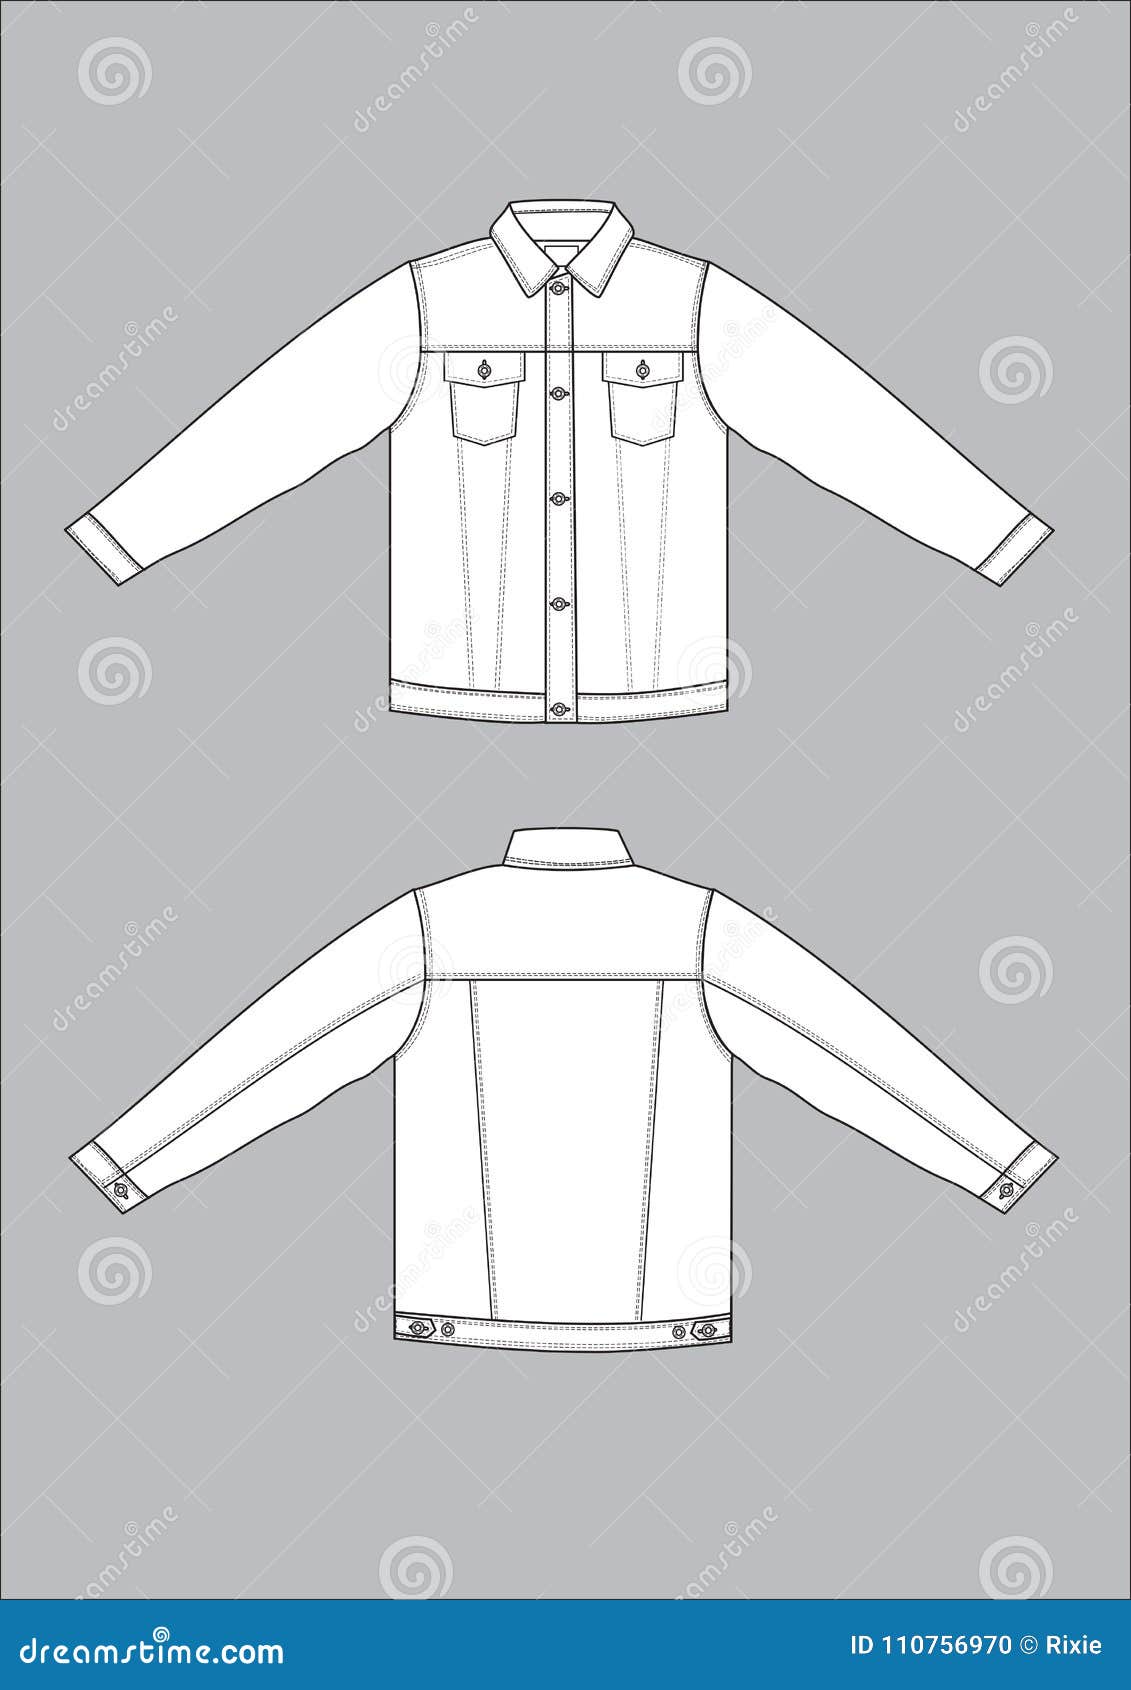 Flat Sketches of Mens Jackets Vector Images over 1400